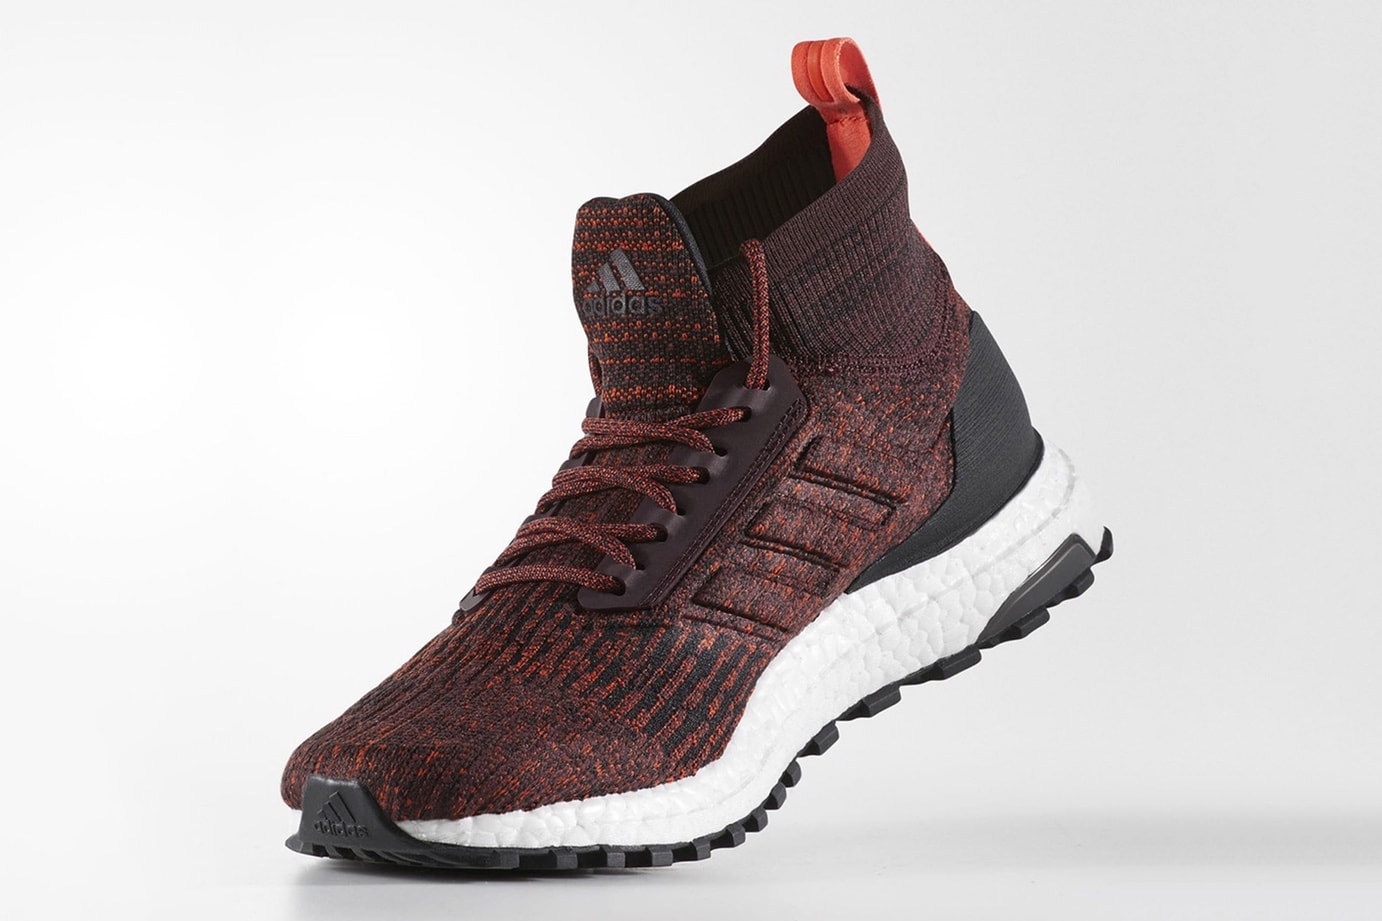 adidas UltraBOOST ATR Mid "Heather Burgundy" Official Images